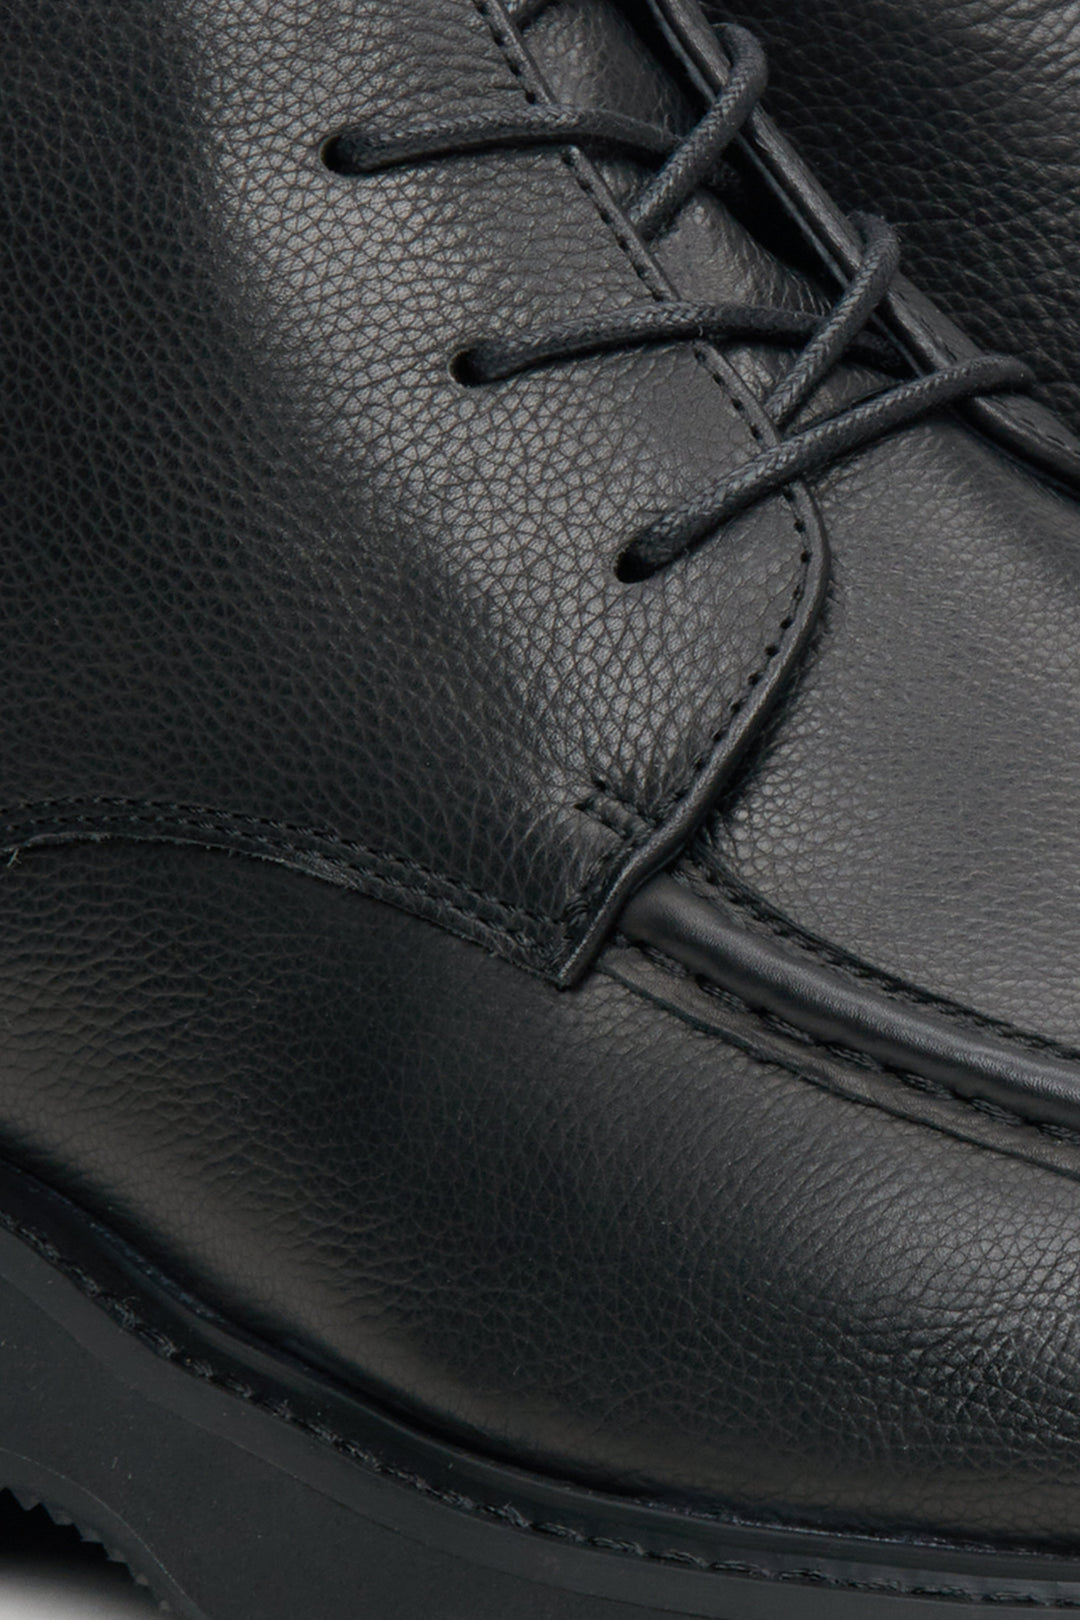 Men's black leather boots by Estro - close-up on the seam line.Black leather men's boots by Estro - close-up on the seam line.